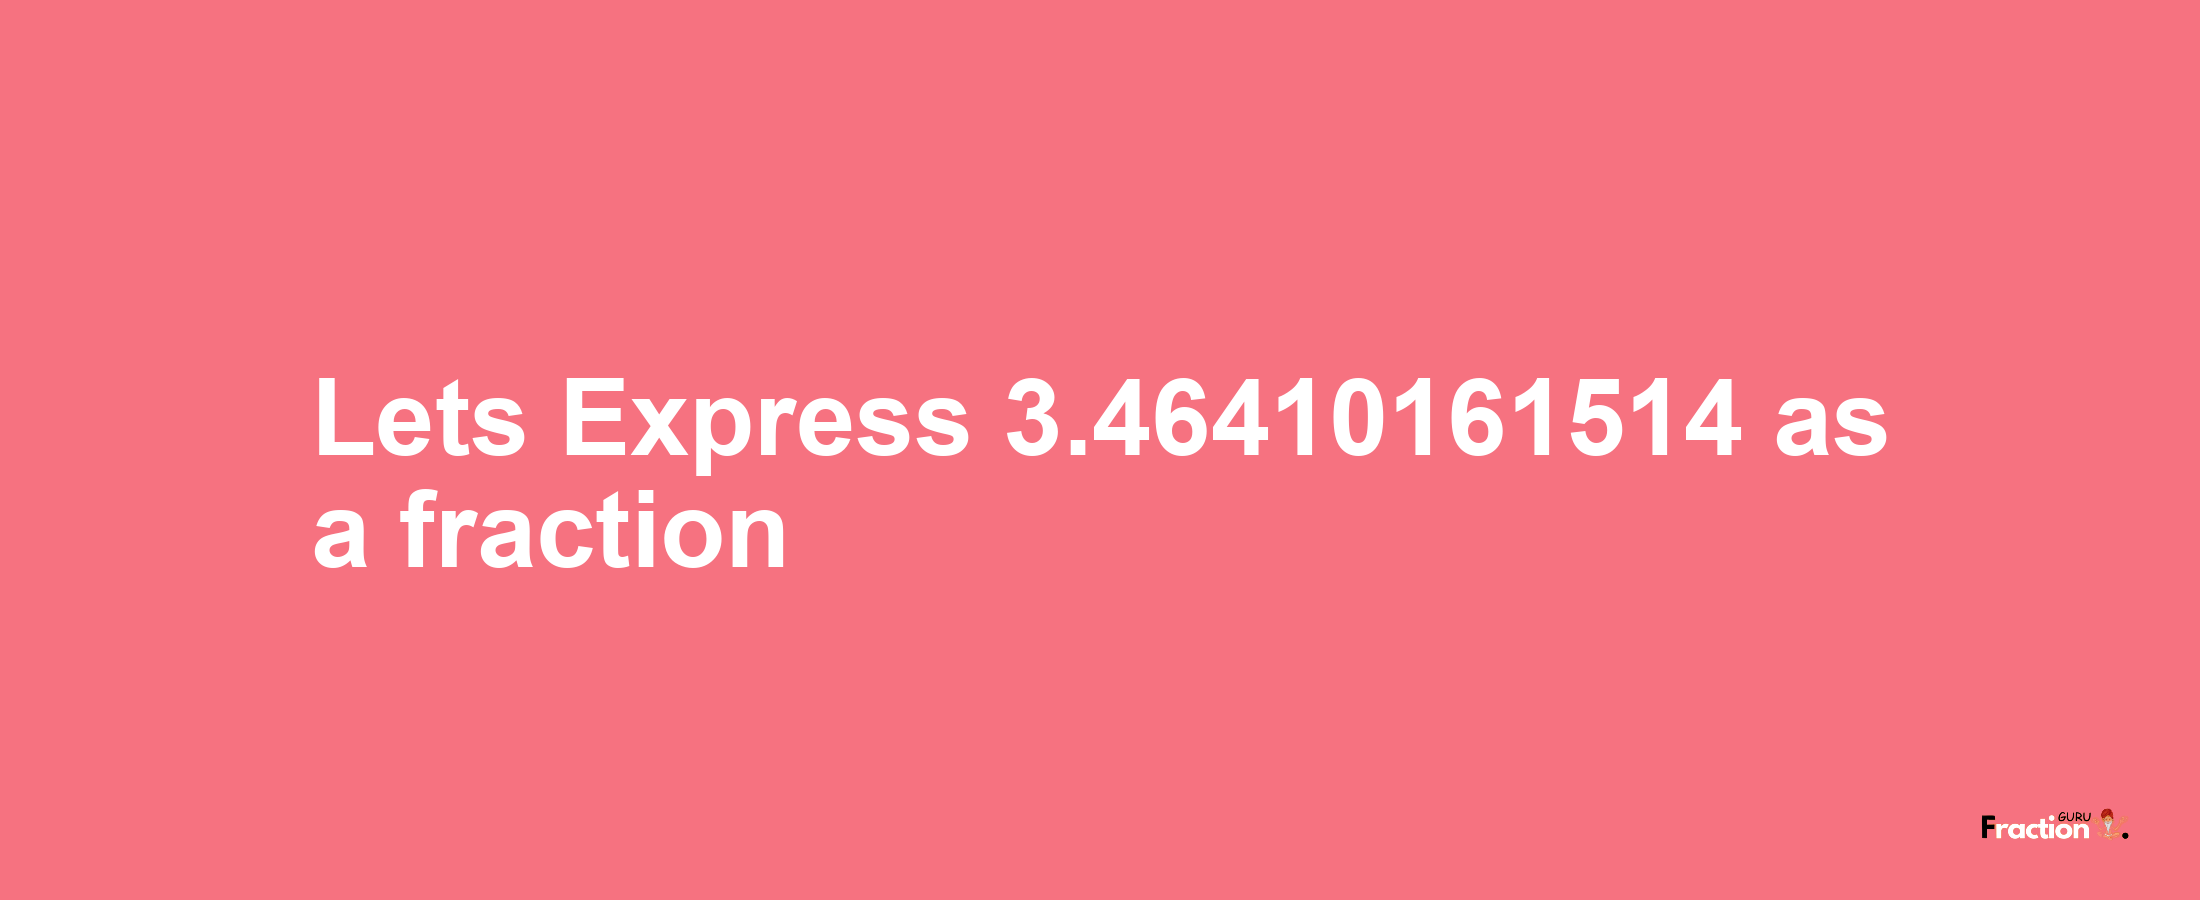 Lets Express 3.46410161514 as afraction